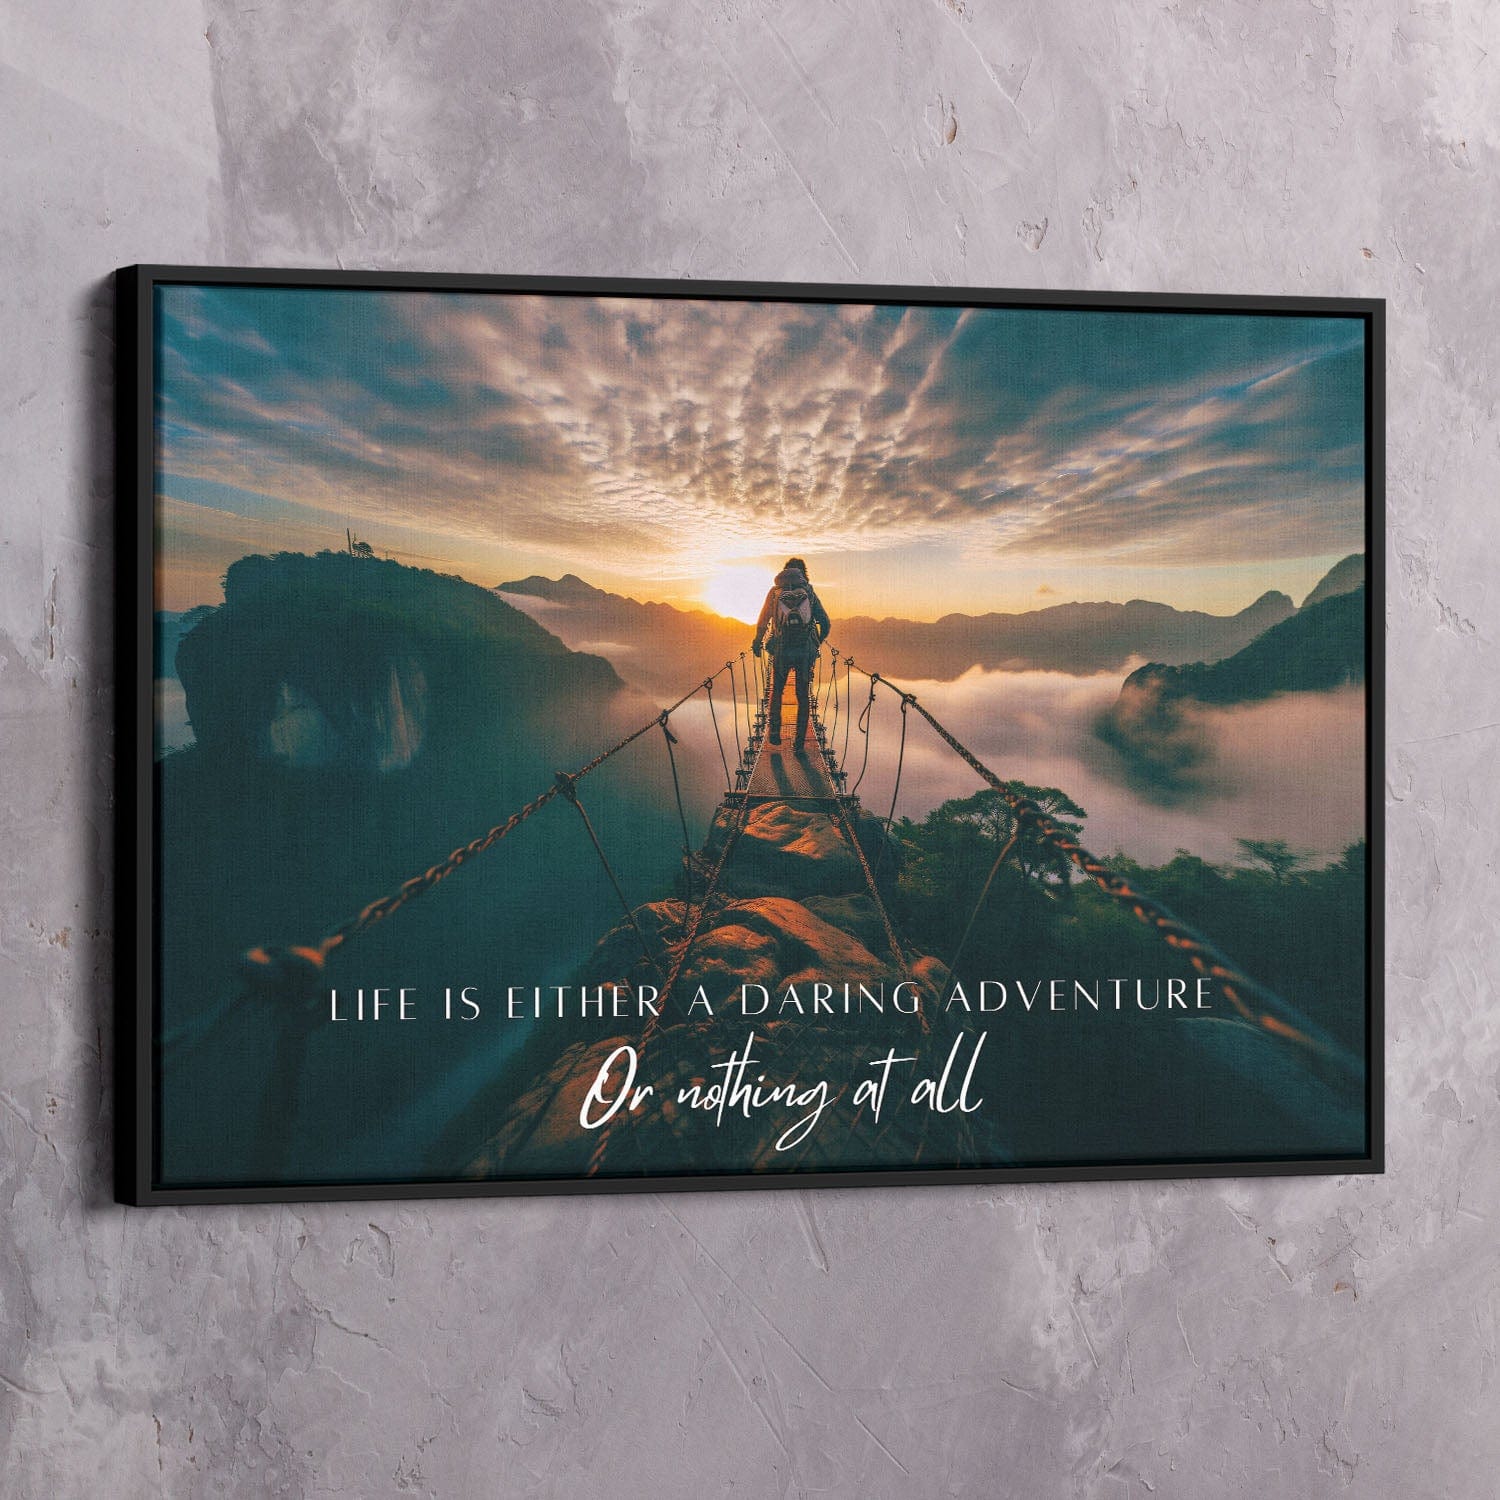 Life is either a daring adventure or nothing at all - Helen Keller Quote Wall Art | Inspirational Wall Art Motivational Wall Art Quotes Office Art | ImpaktMaker Exclusive Canvas Art Landscape